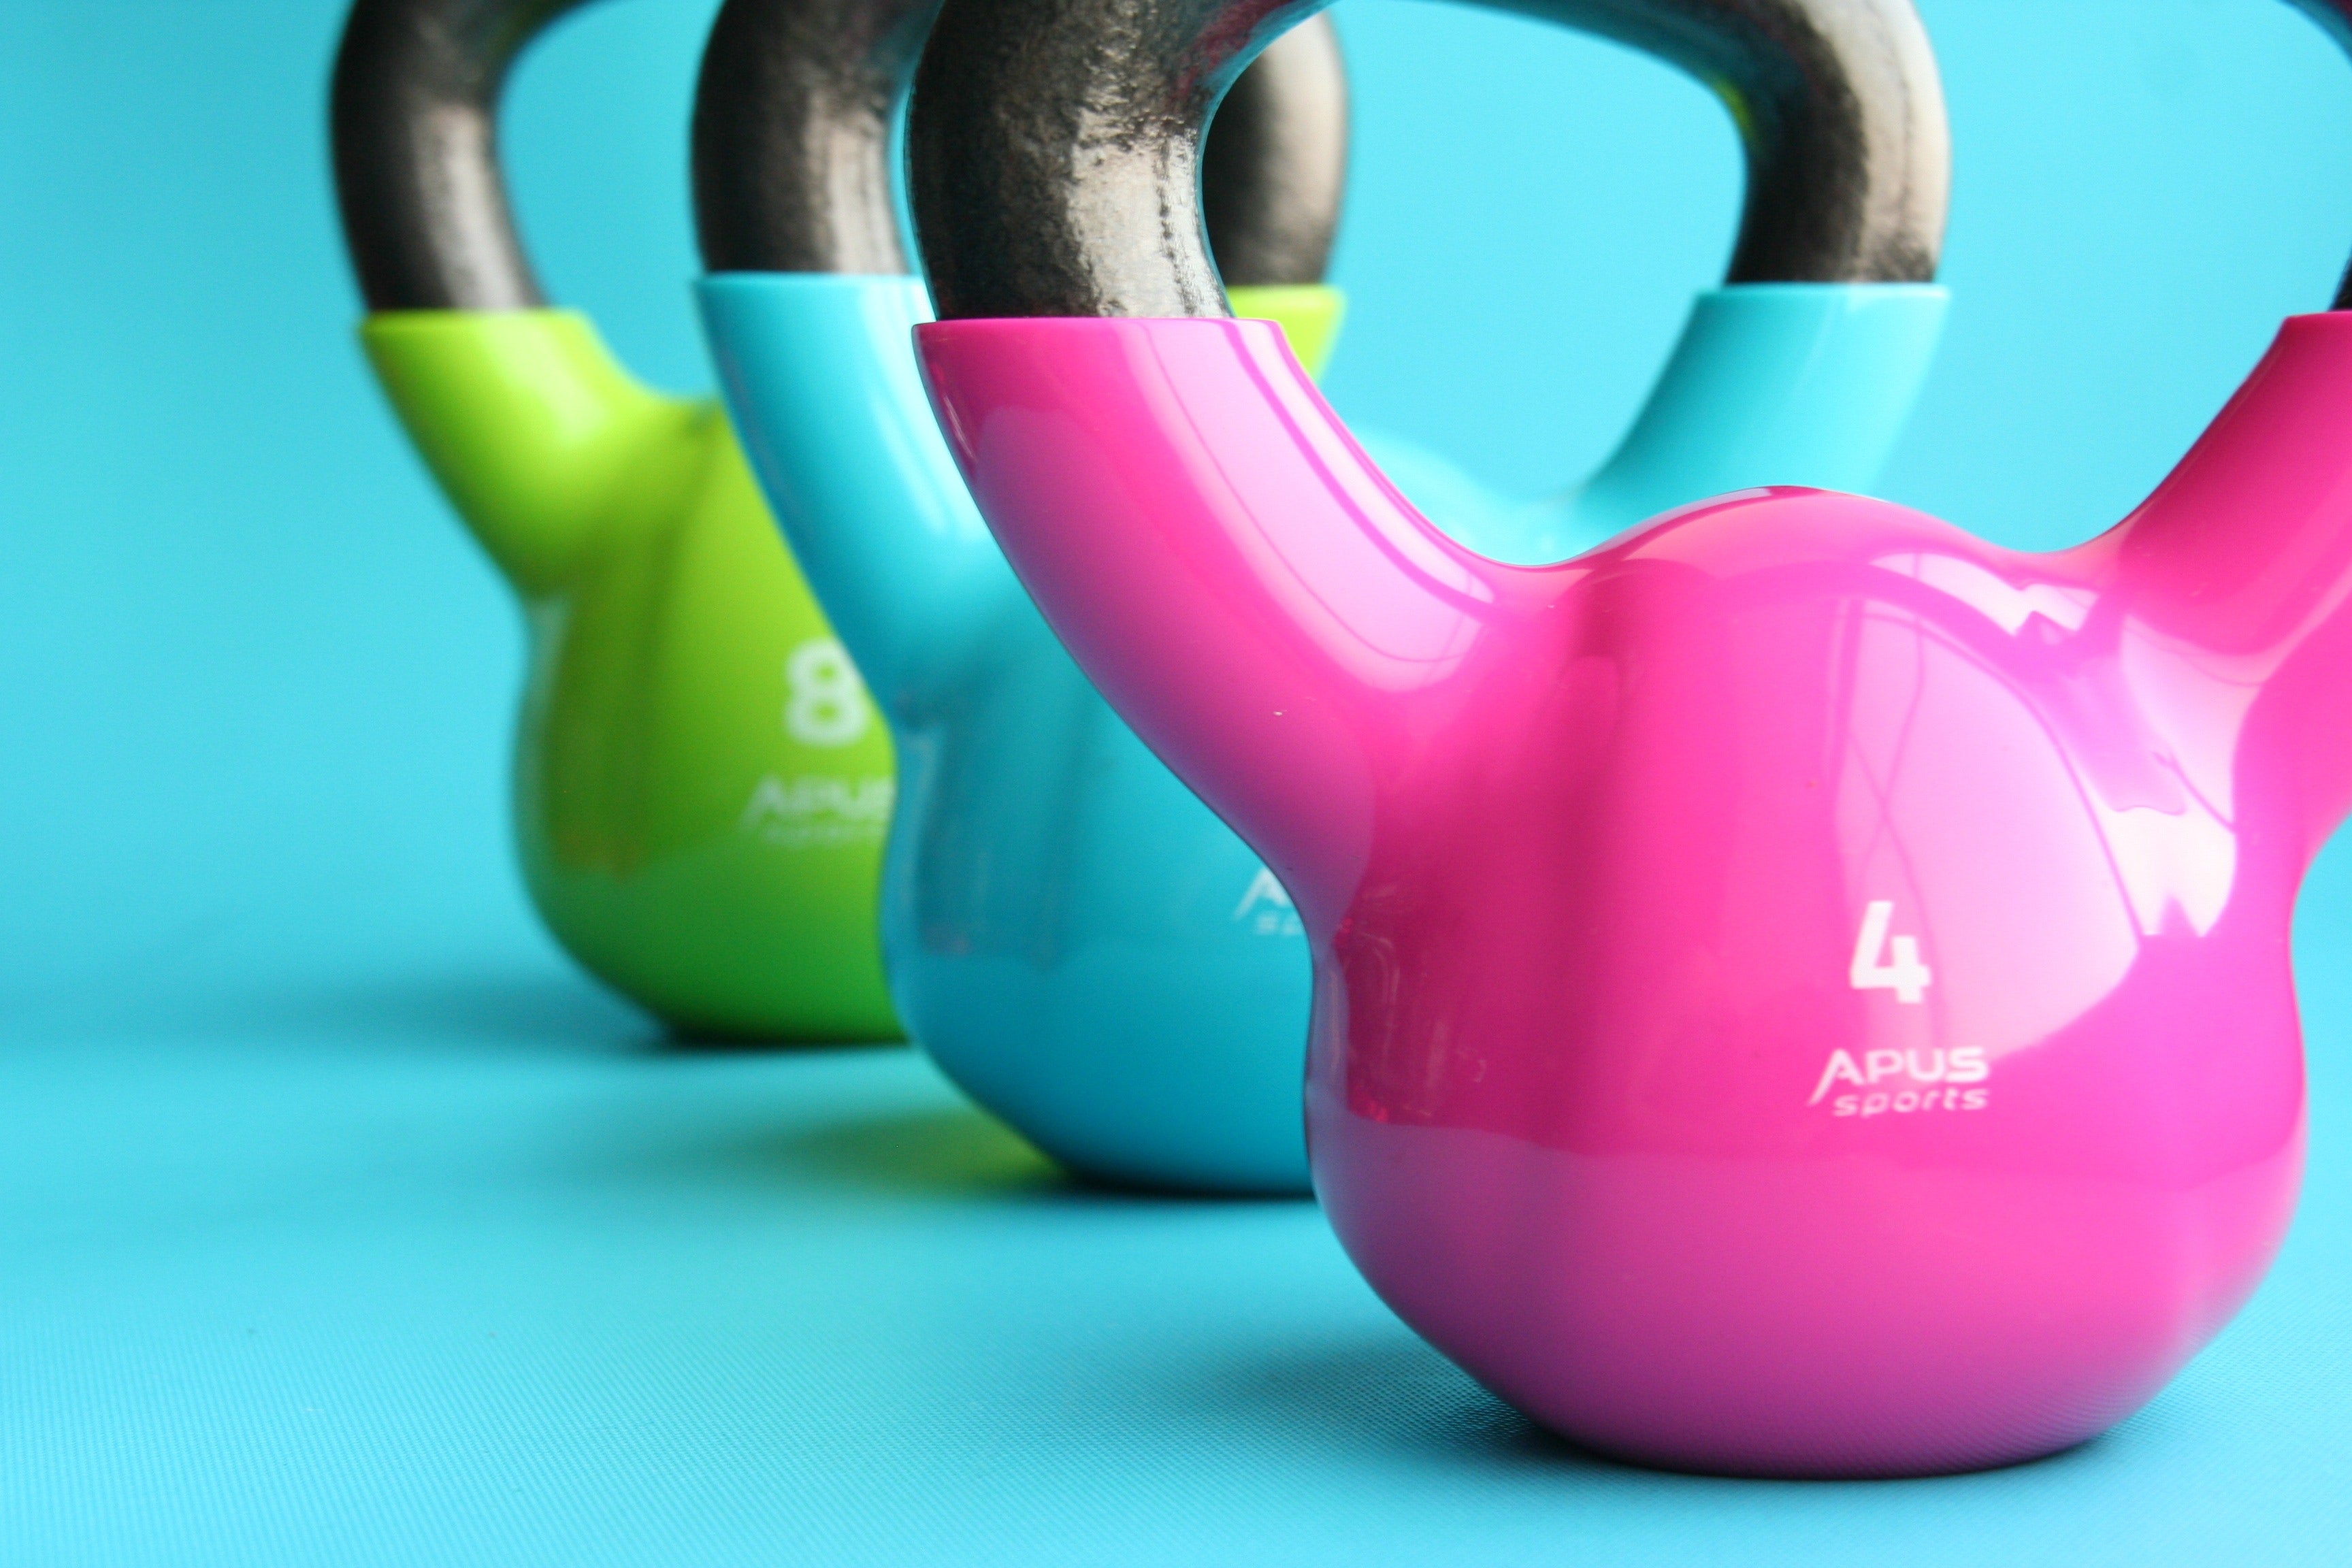 Three colorful multi-weight kettlebells sit on a blue floor in a row. These kettlebells are used for fitness routines, personal training, and weight loss.